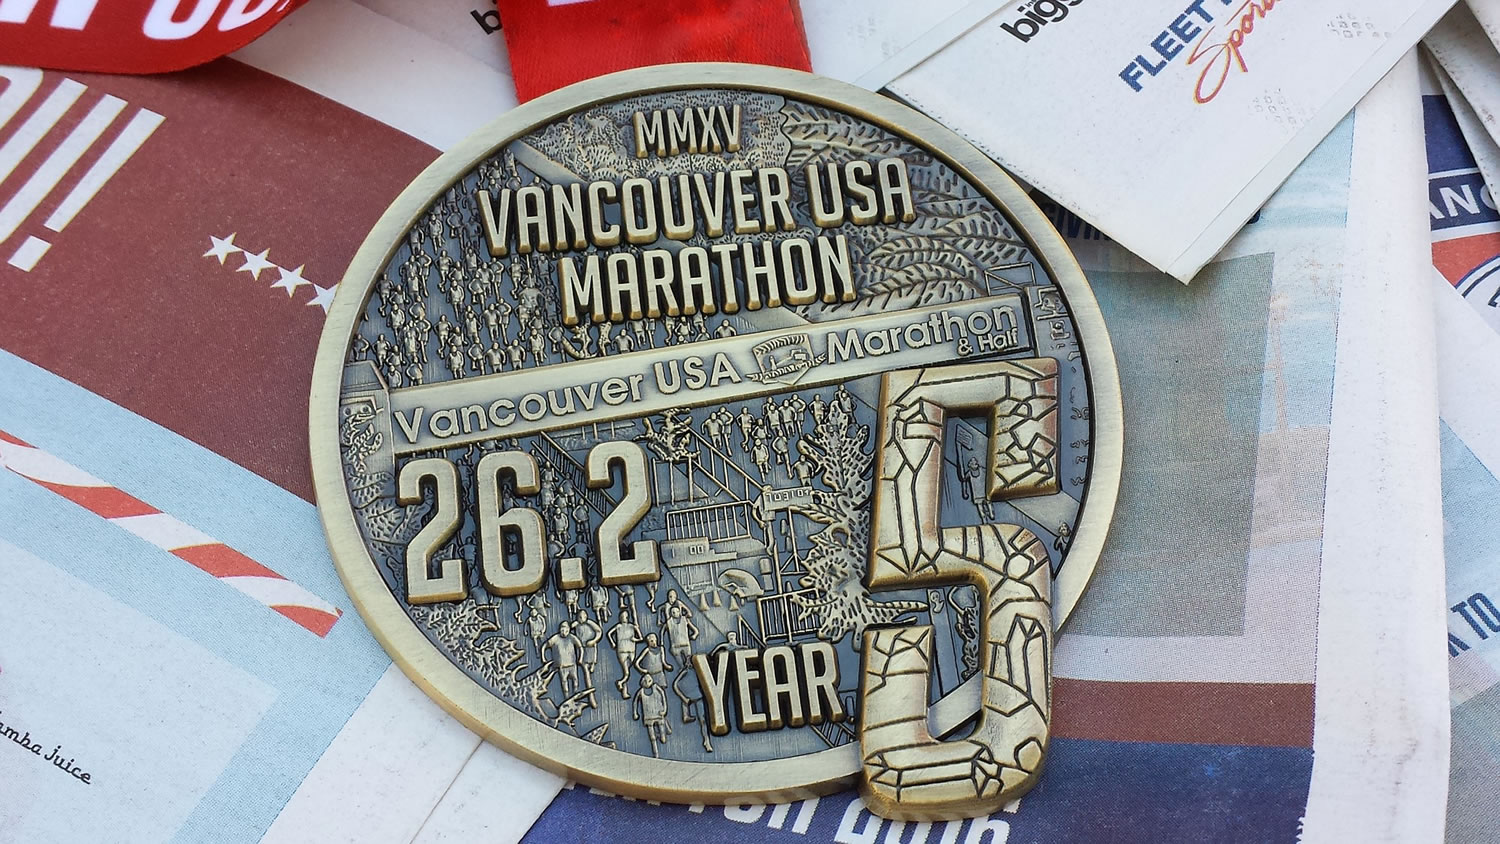 The finisher medals for the 2015 Vancouver USA Marathon